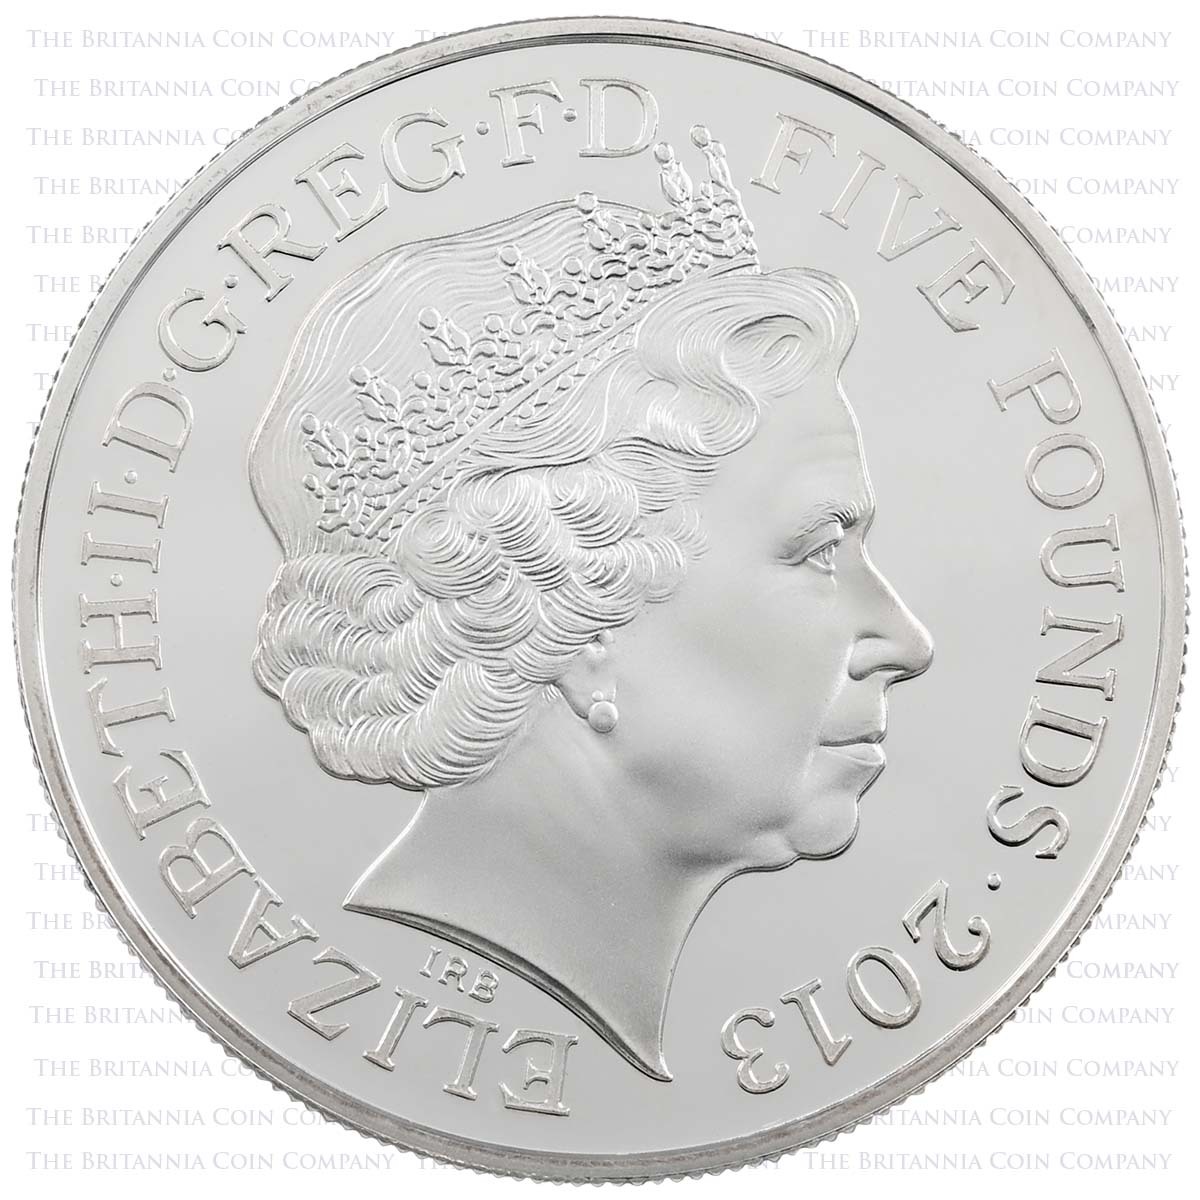 2013 Queen's Coronation 60th Anniversary Five Pound Crown Piedfort Silver Proof Coin Obverse